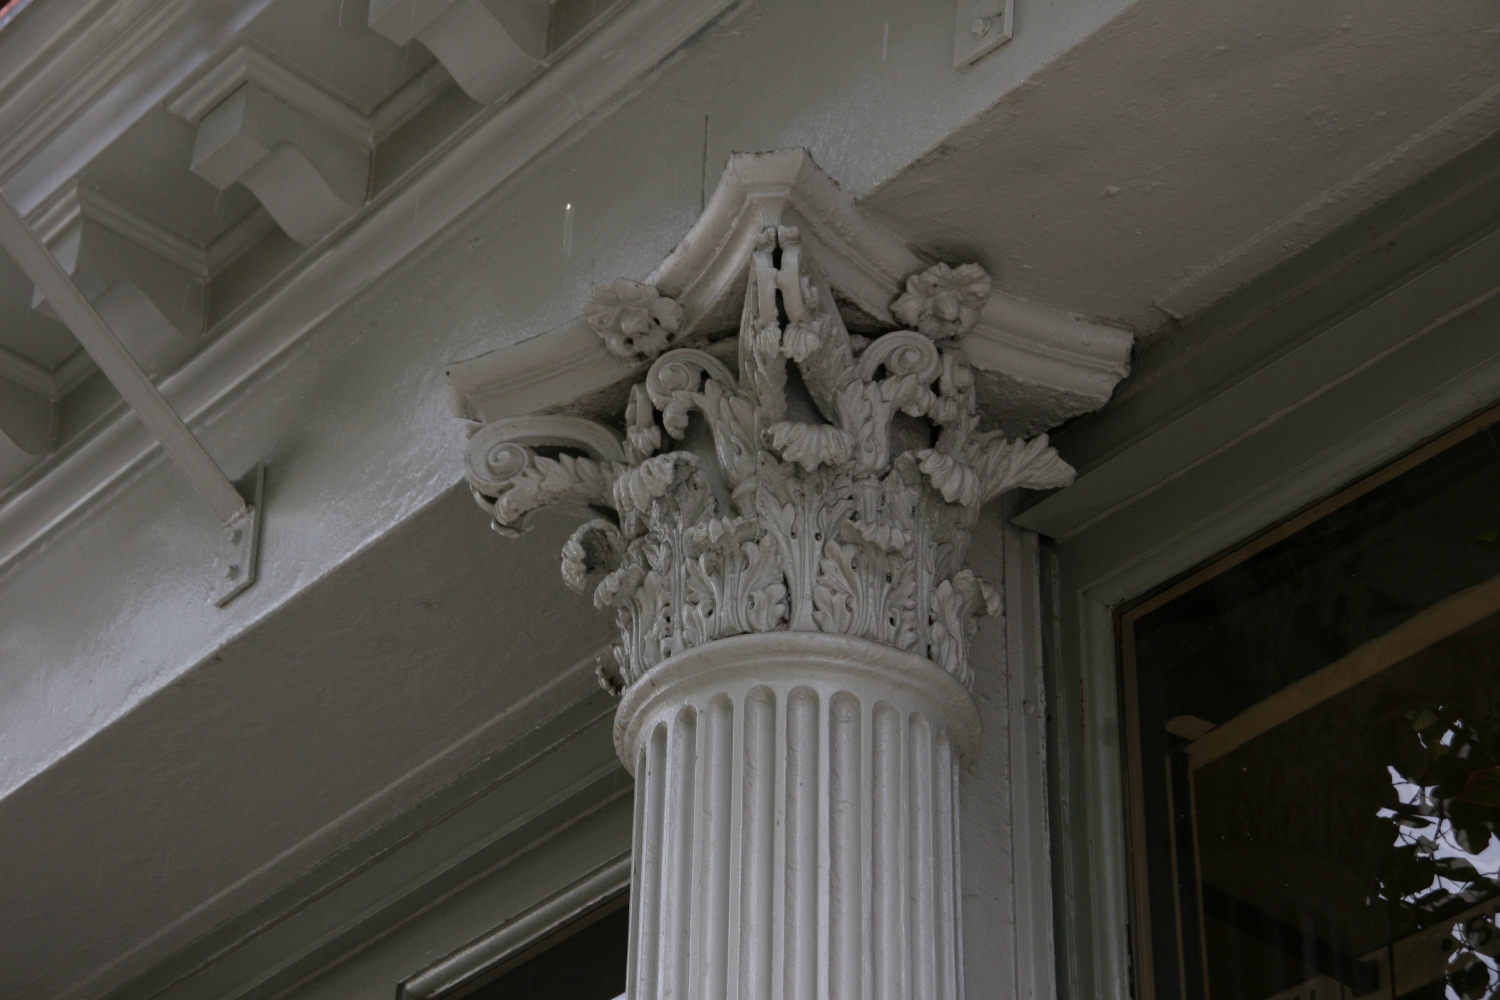 Close-up view of an ornamental column piece from a Manhattan building restored by Jepol Construction, highlighting the attention to detail and craftsmanship in metal restoration work.